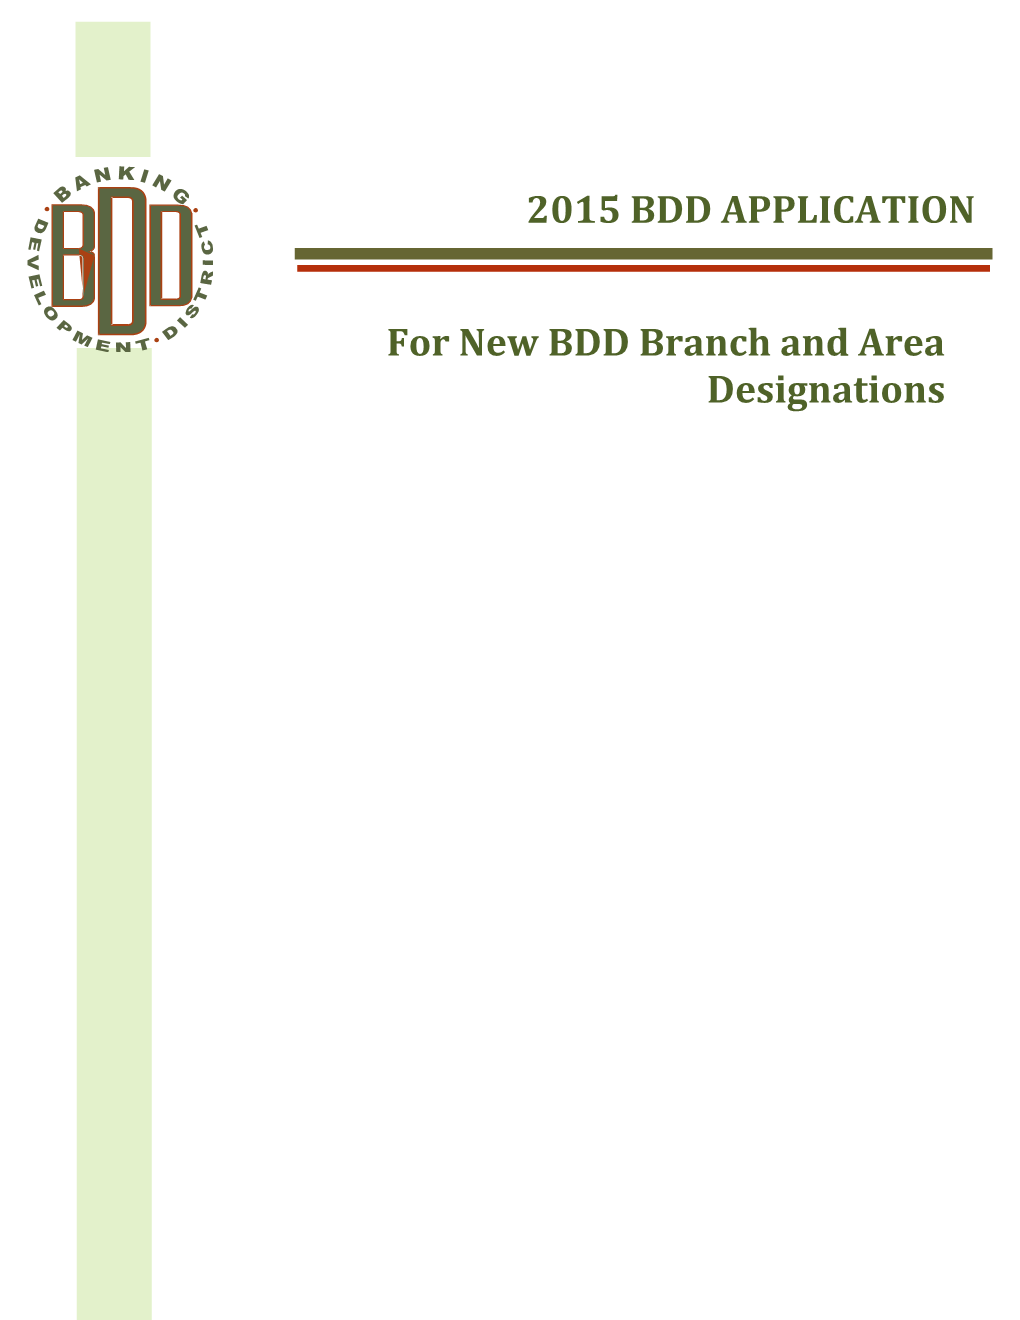 For New BDD Branch and Area Designations